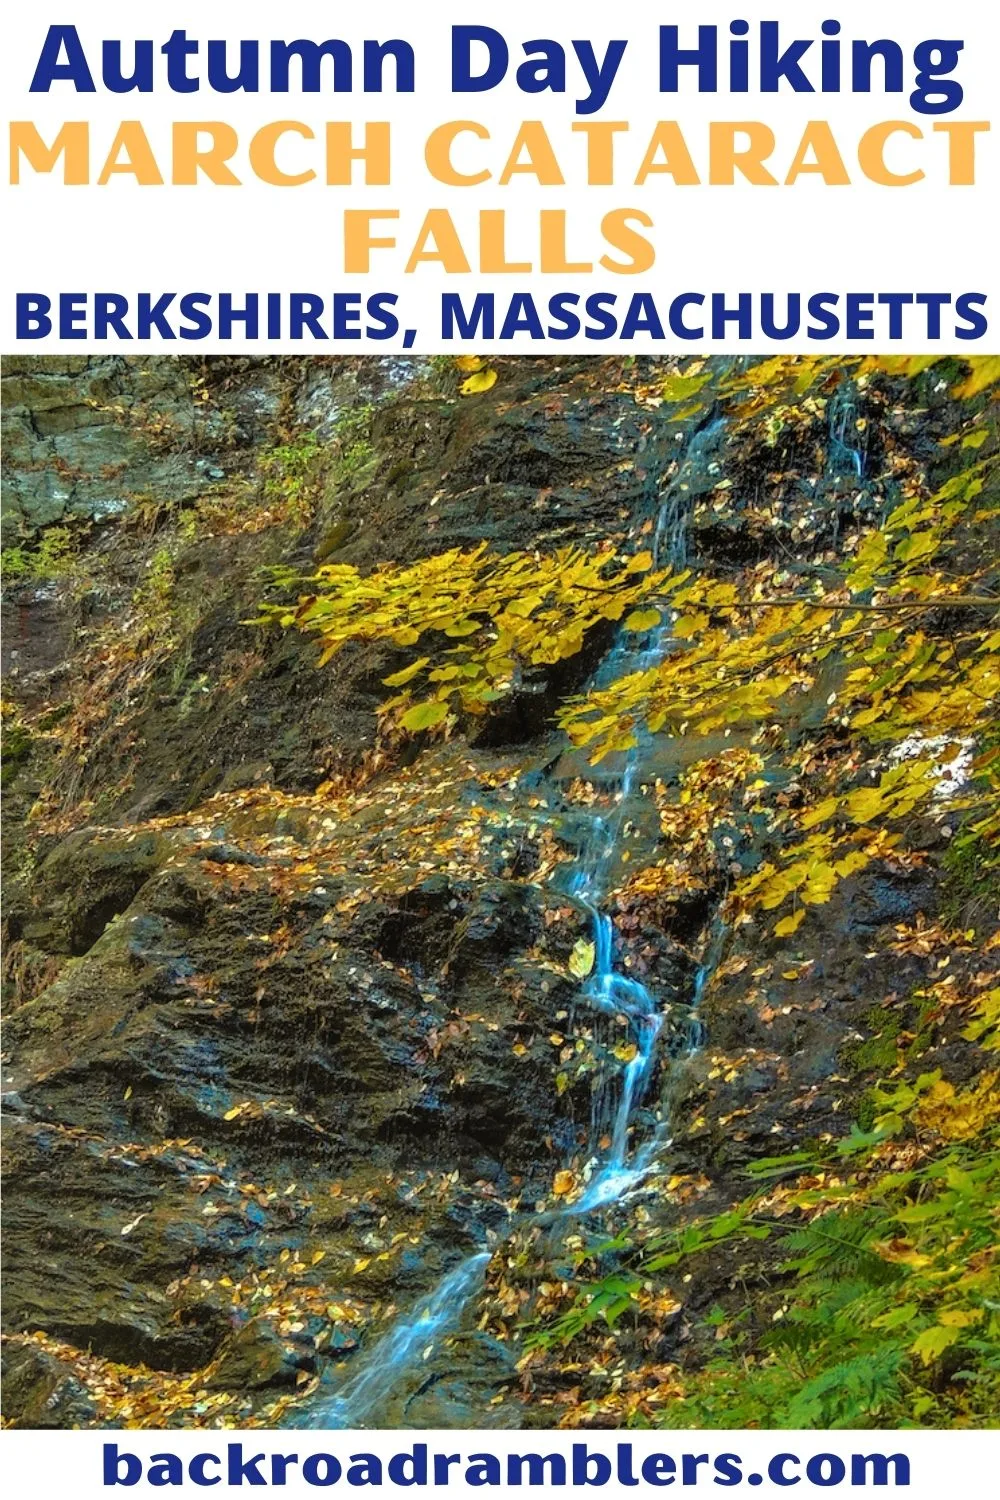 A fall view of March Cataract Falls in Massachusetts. Text overlay: Autumn Day Hiking - March Cataract Falls in the Berkshires of Massachusetts.